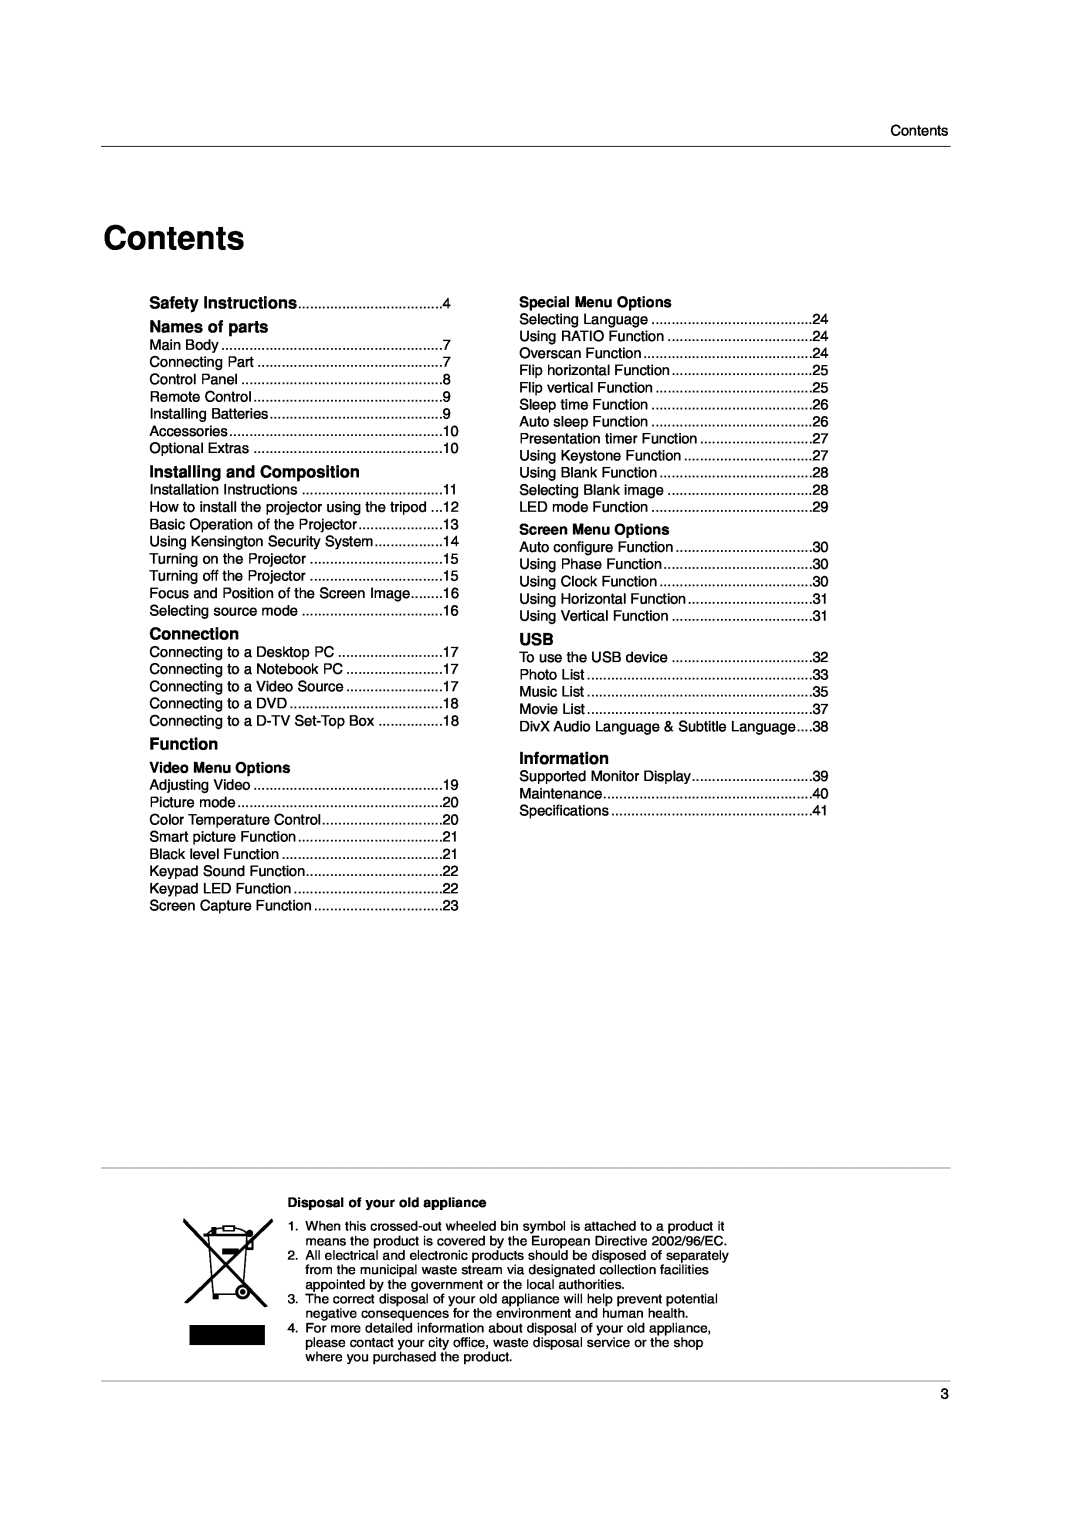 LG Electronics HS102 owner manual Contents, Names of parts, Installing and Composition, Connection, Function, Information 